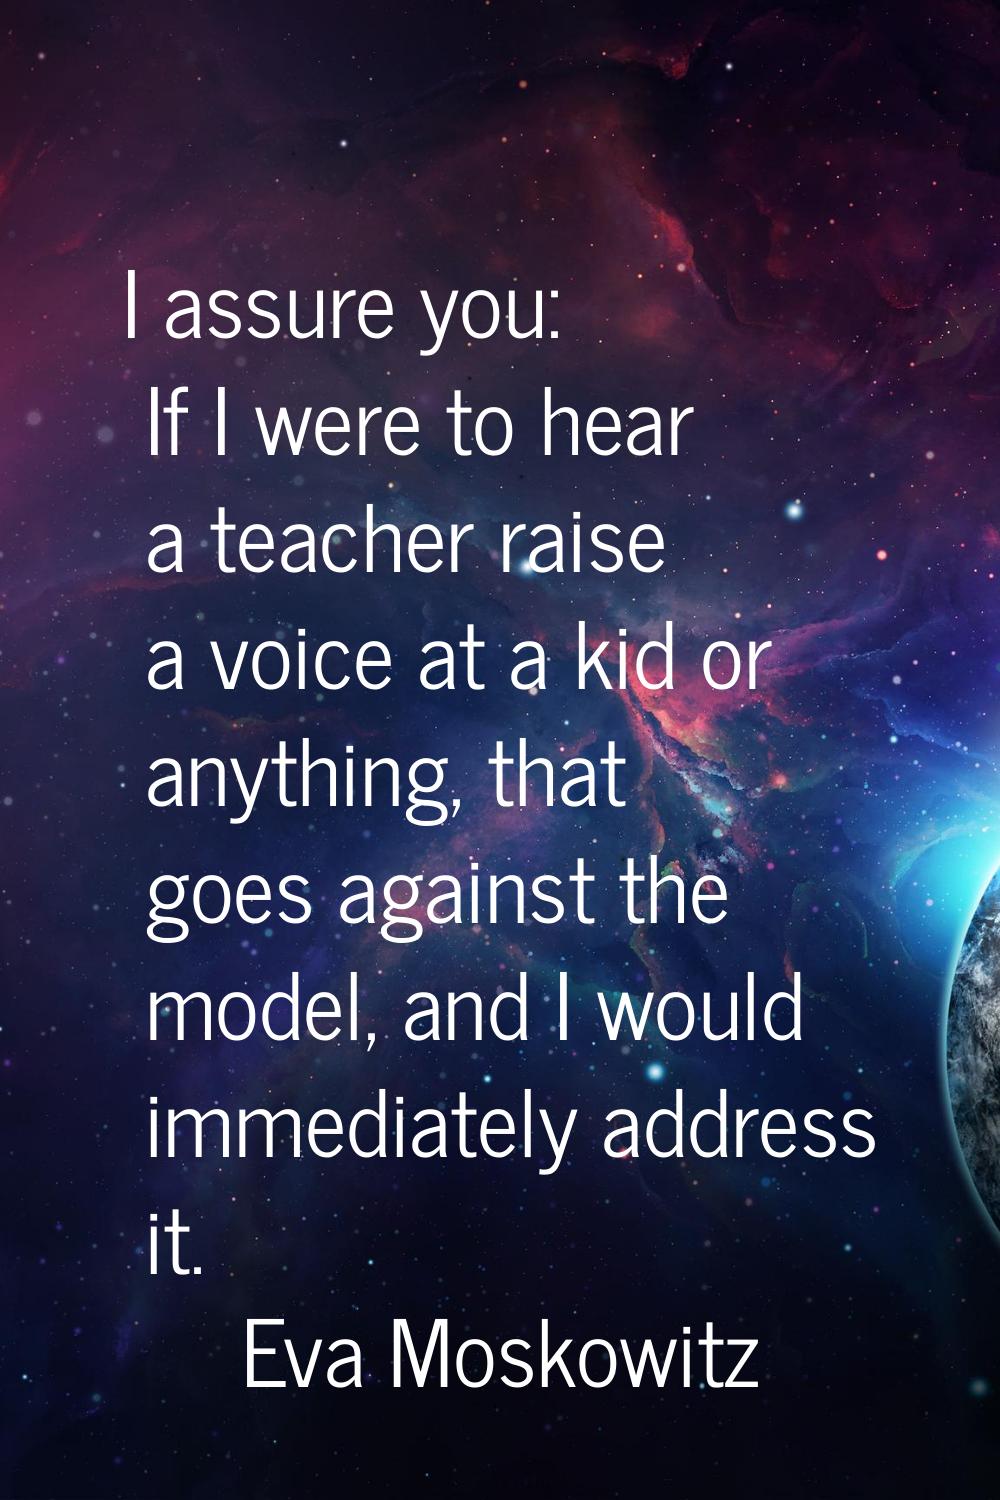 I assure you: If I were to hear a teacher raise a voice at a kid or anything, that goes against the